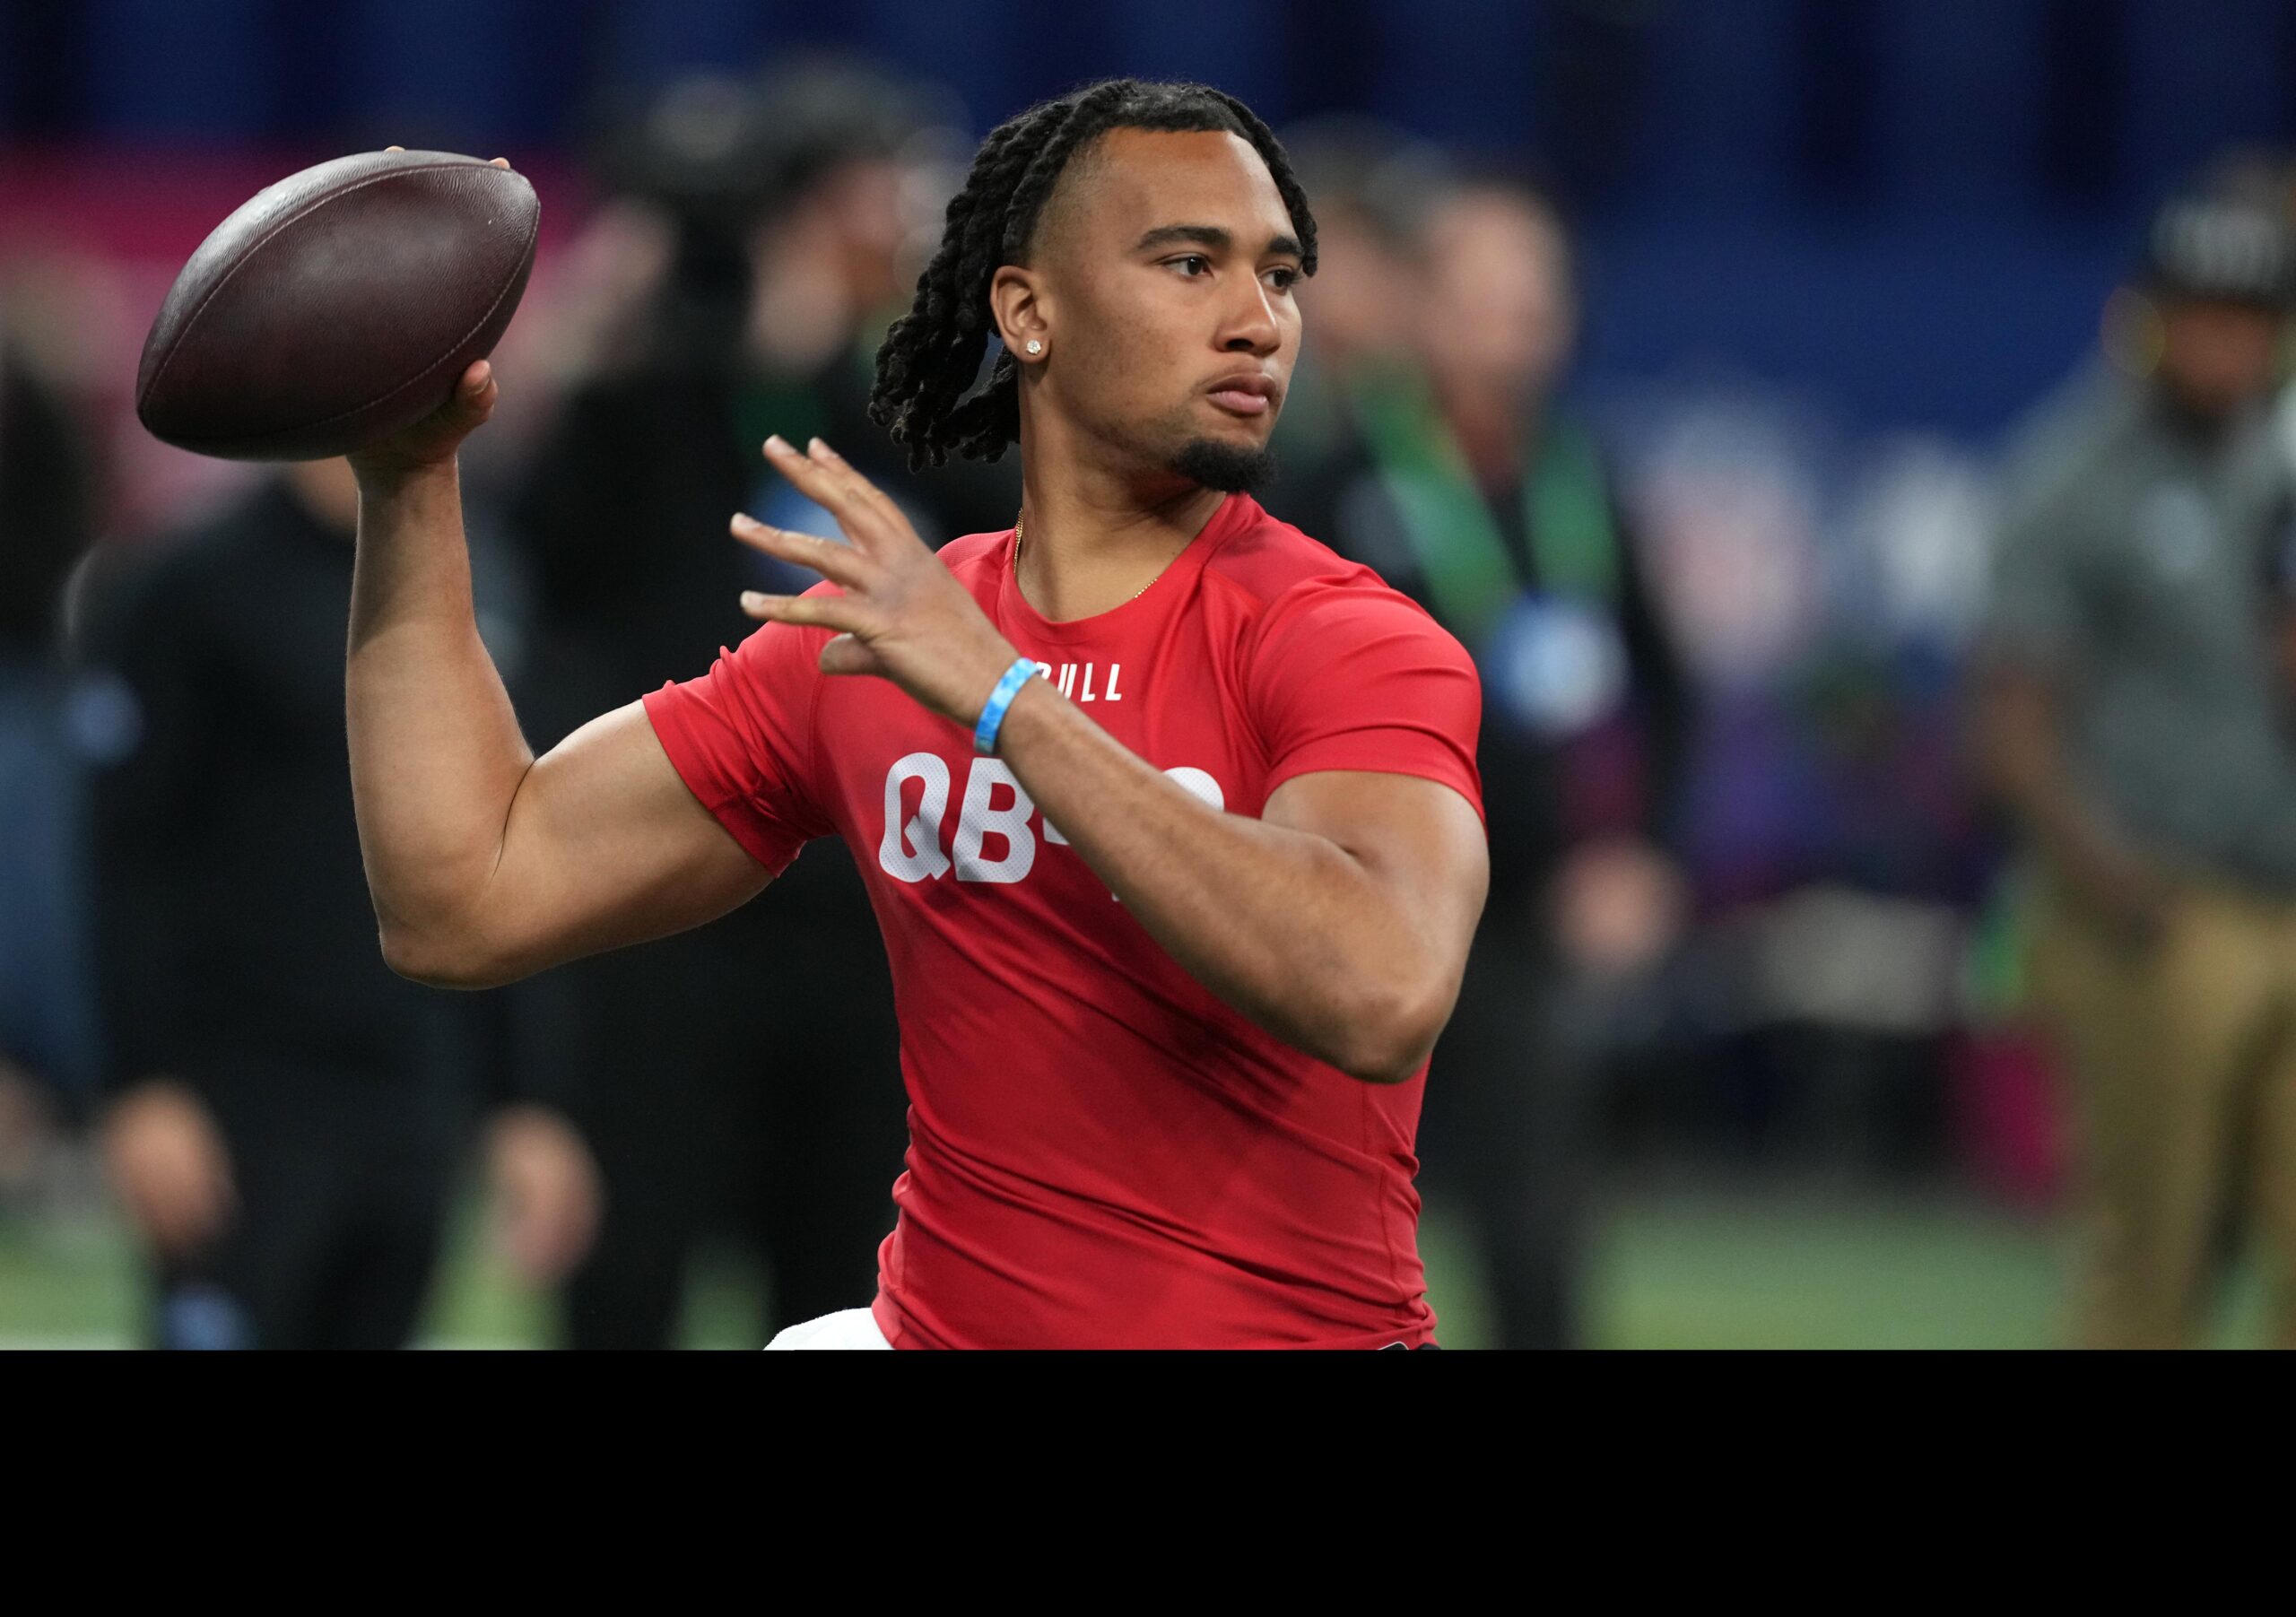 2023 NFL Draft: What’s the most important skill for quarterback prospects?